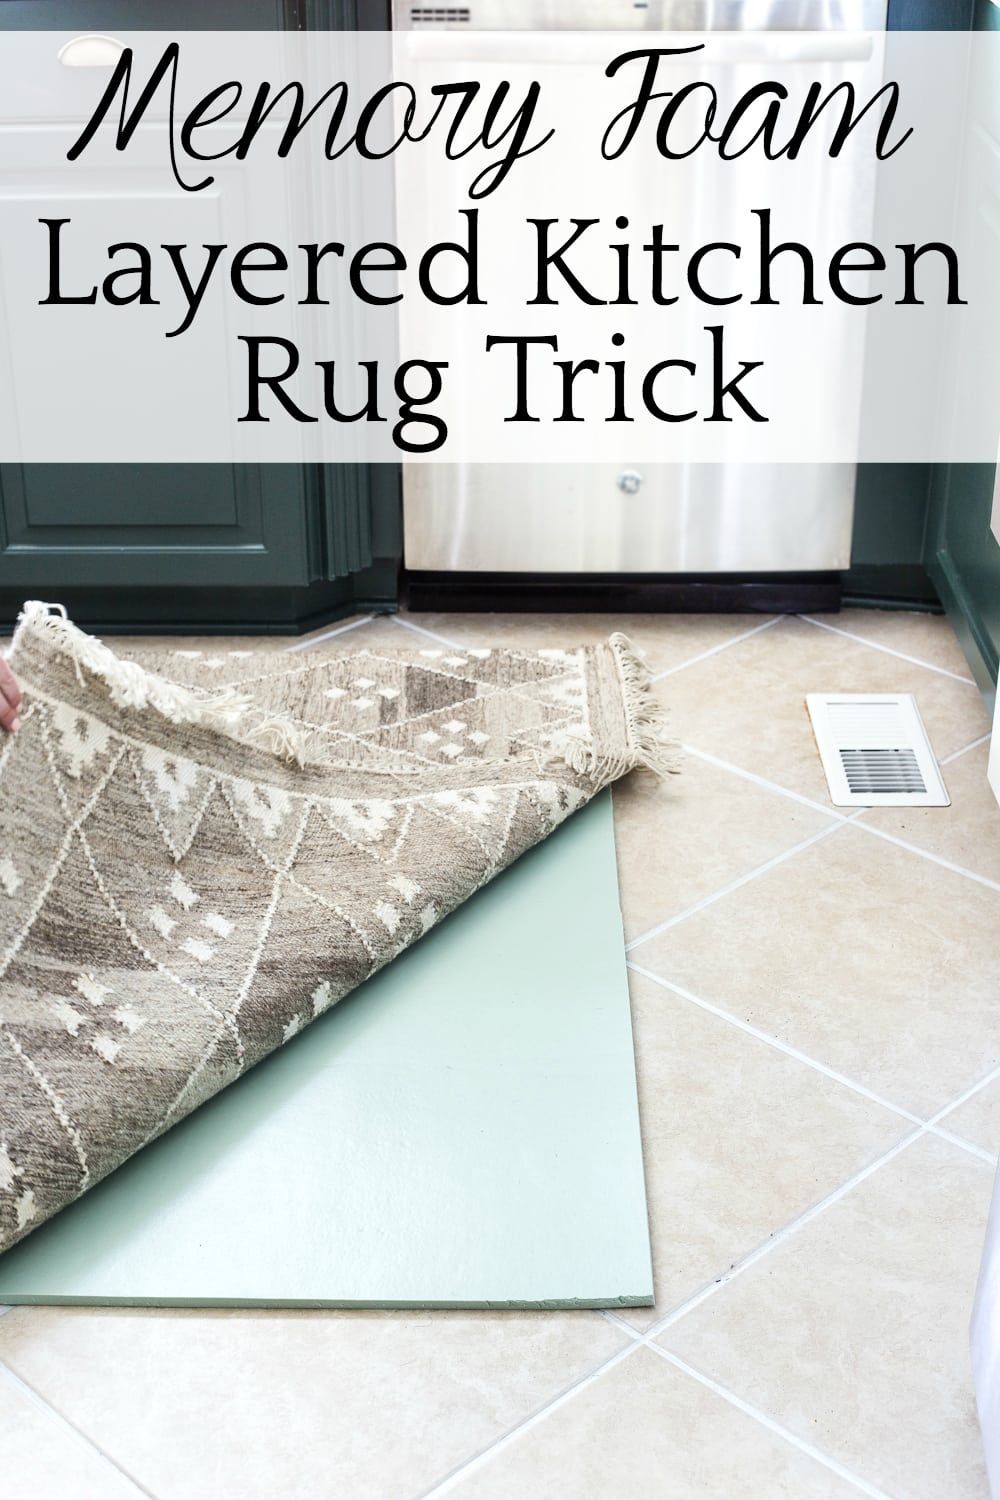 Memory Foam Layered Kitchen Rug and Tile Grout Refresh – Bless’er House